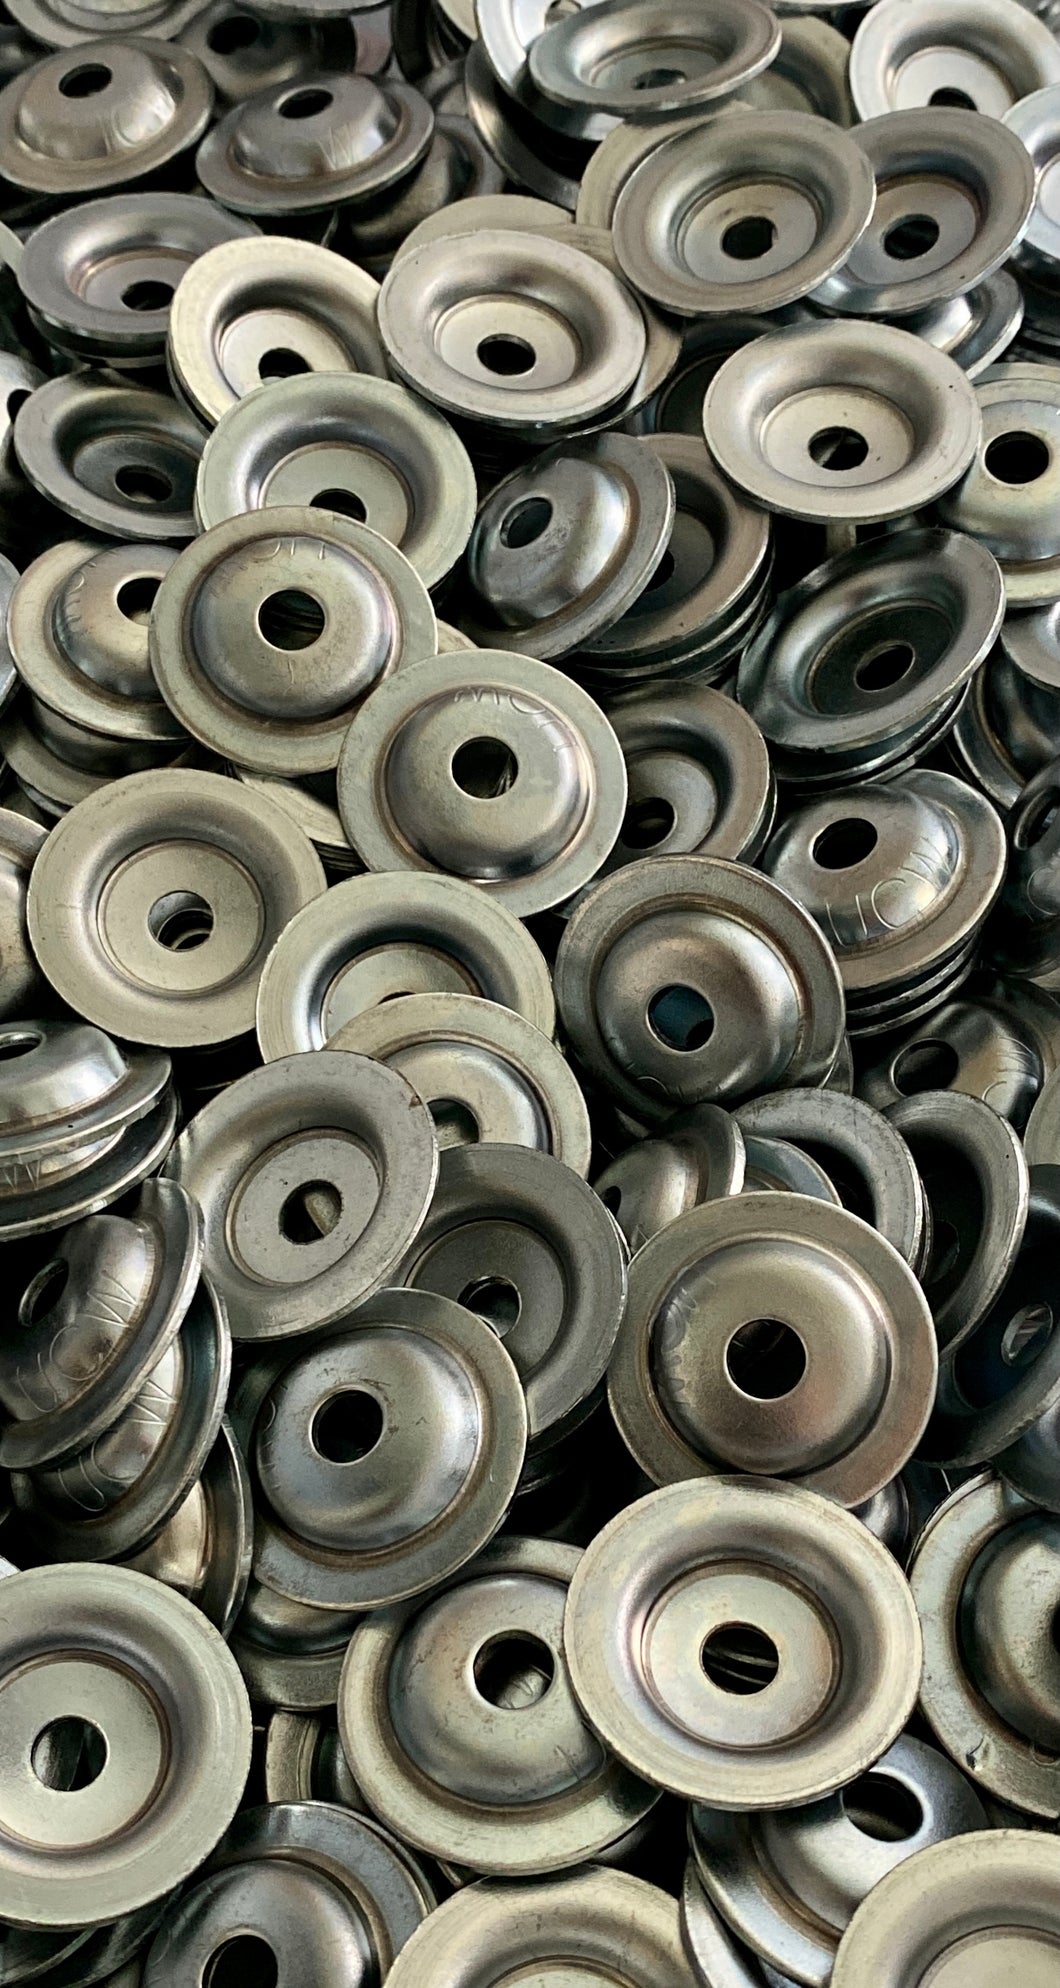 Peak Racing Products Stainless Steel Cup Washers